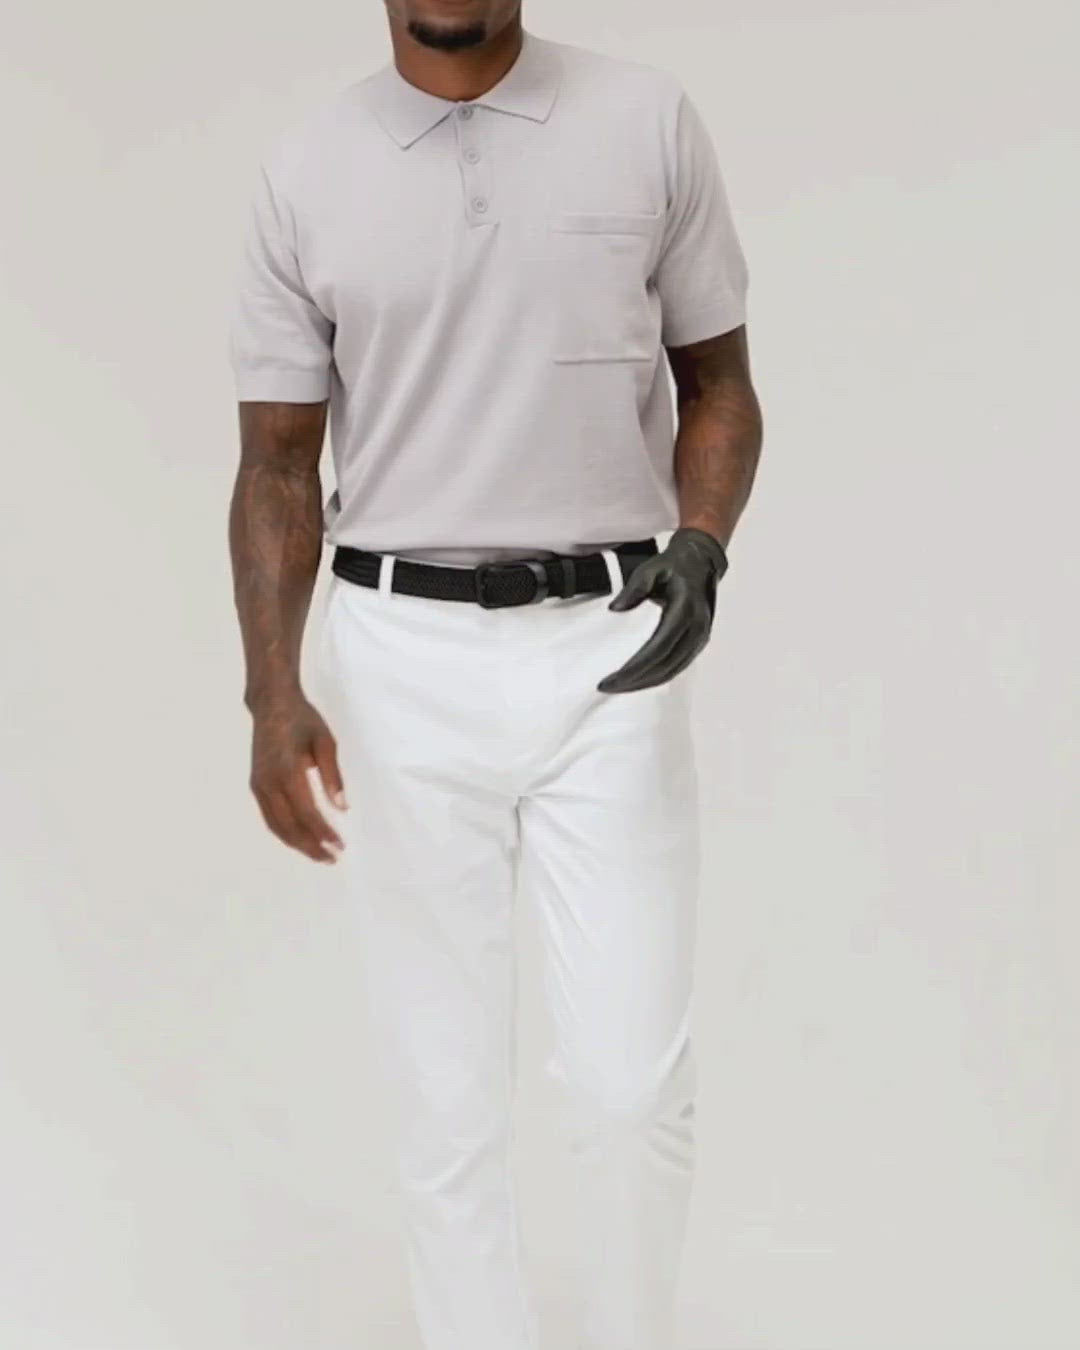 Ghost Golf Black Belt with Black Buckle and Black Leather Tail. Male Walking and Showing the belt. 